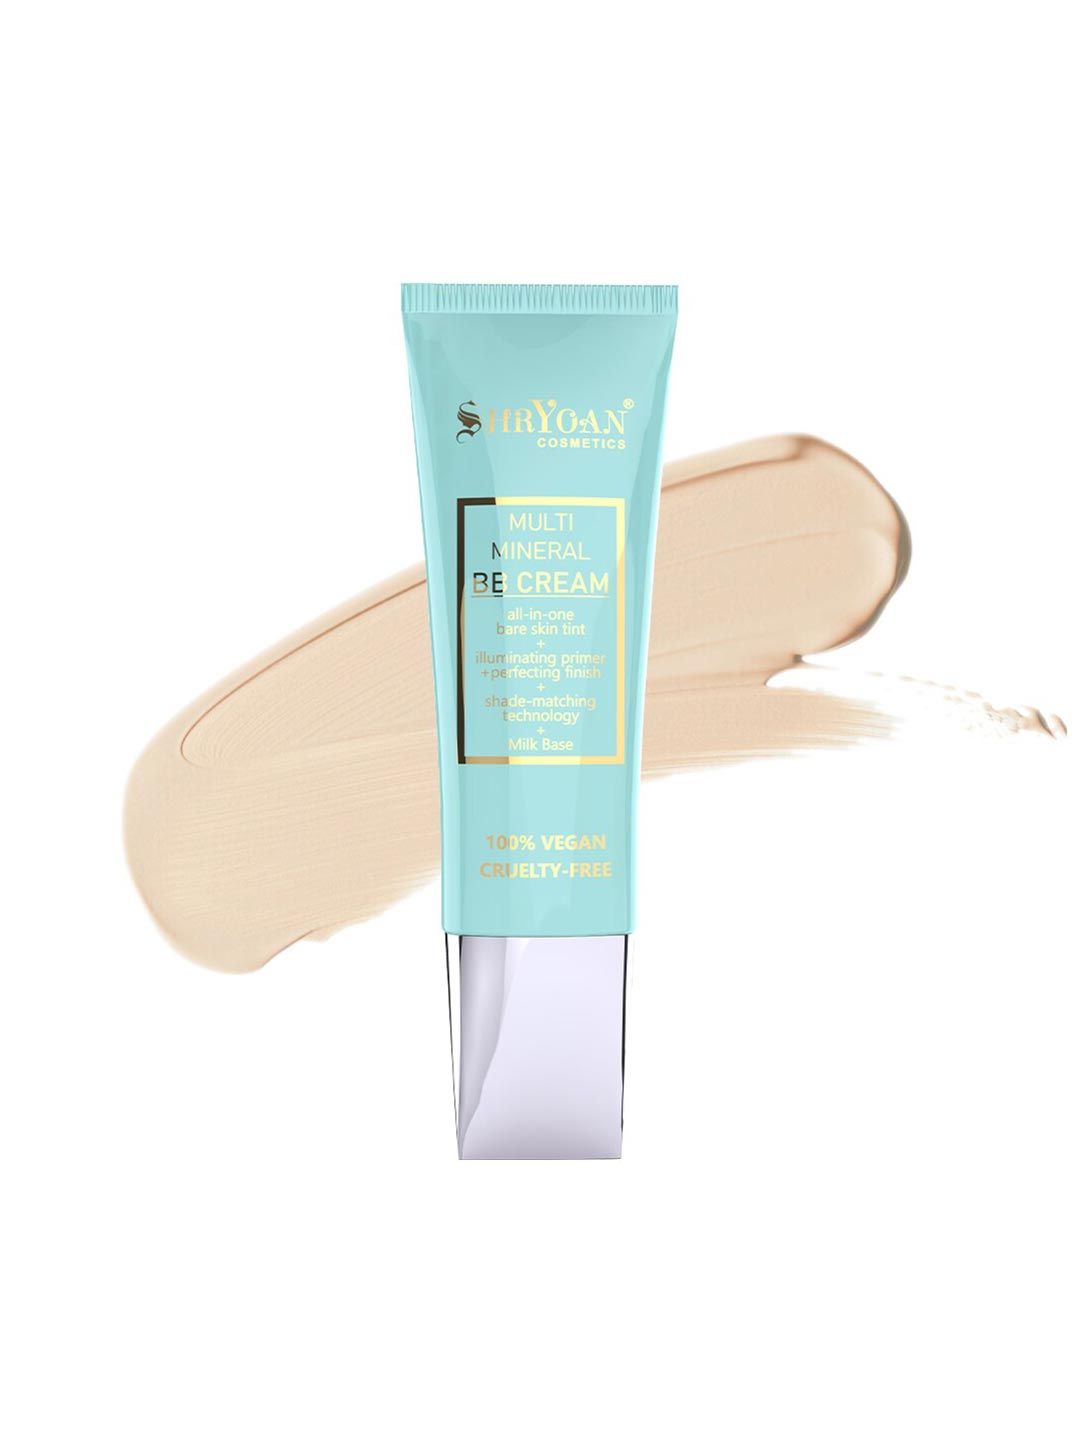 SHRYOAN Multi Mineral BB Cream Royal M Beige 40 gm Price in India